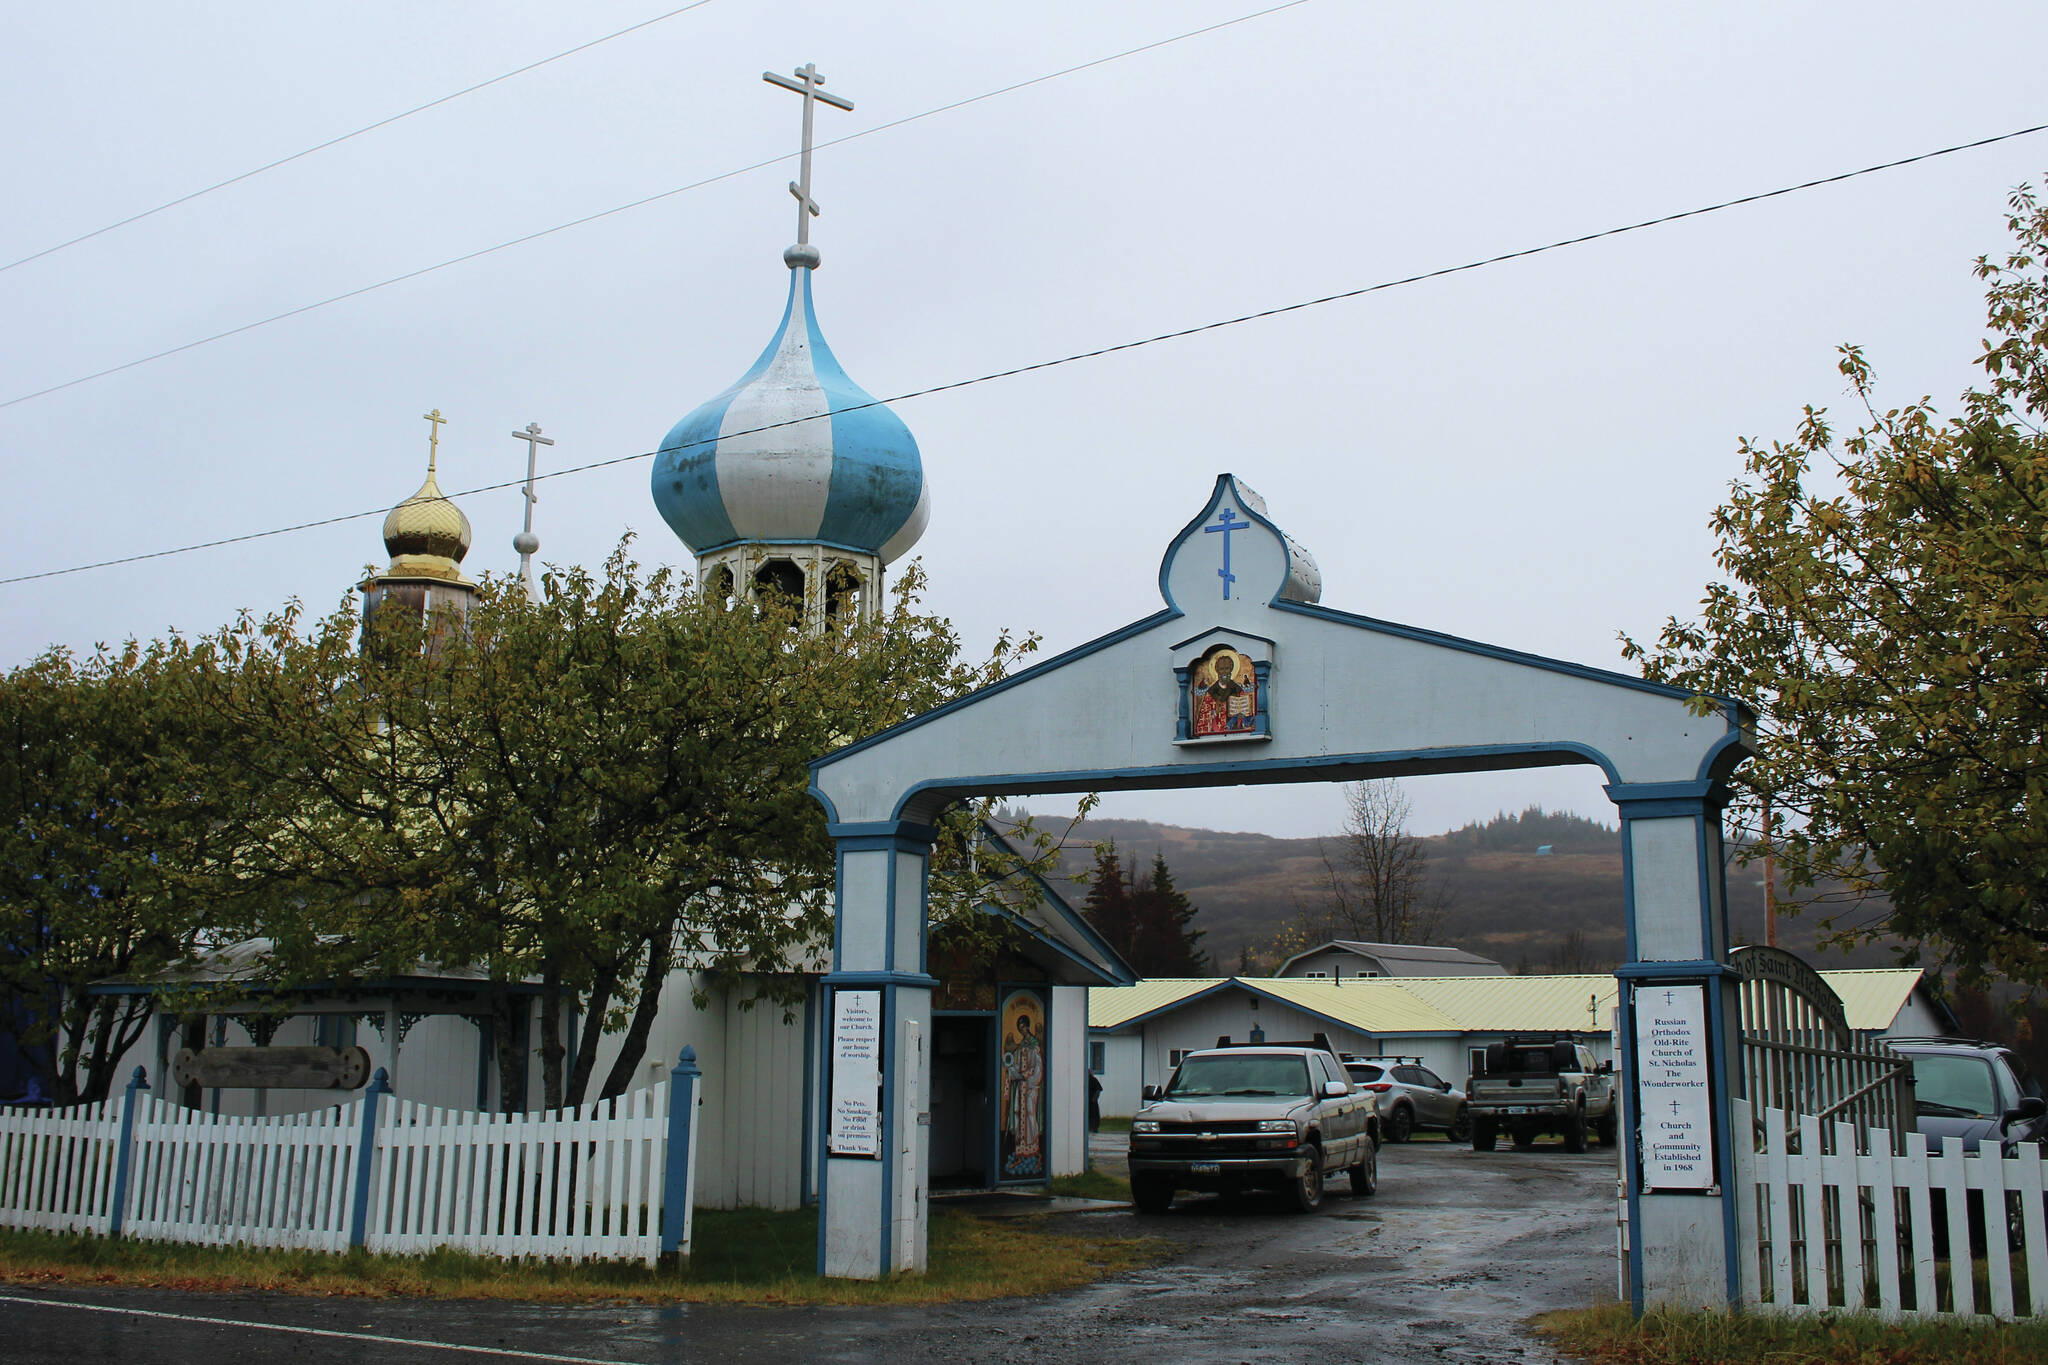 Ashlyn O’Hara/Peninsula Clarion
An arch marks the entrance to the Church of St. Nicholas on Oct. 10 in Nikolaevsk. In rear, cars are parked in front of a building that has been used this school year as a makeshift classroom for families who are part of a home-school cooperative.